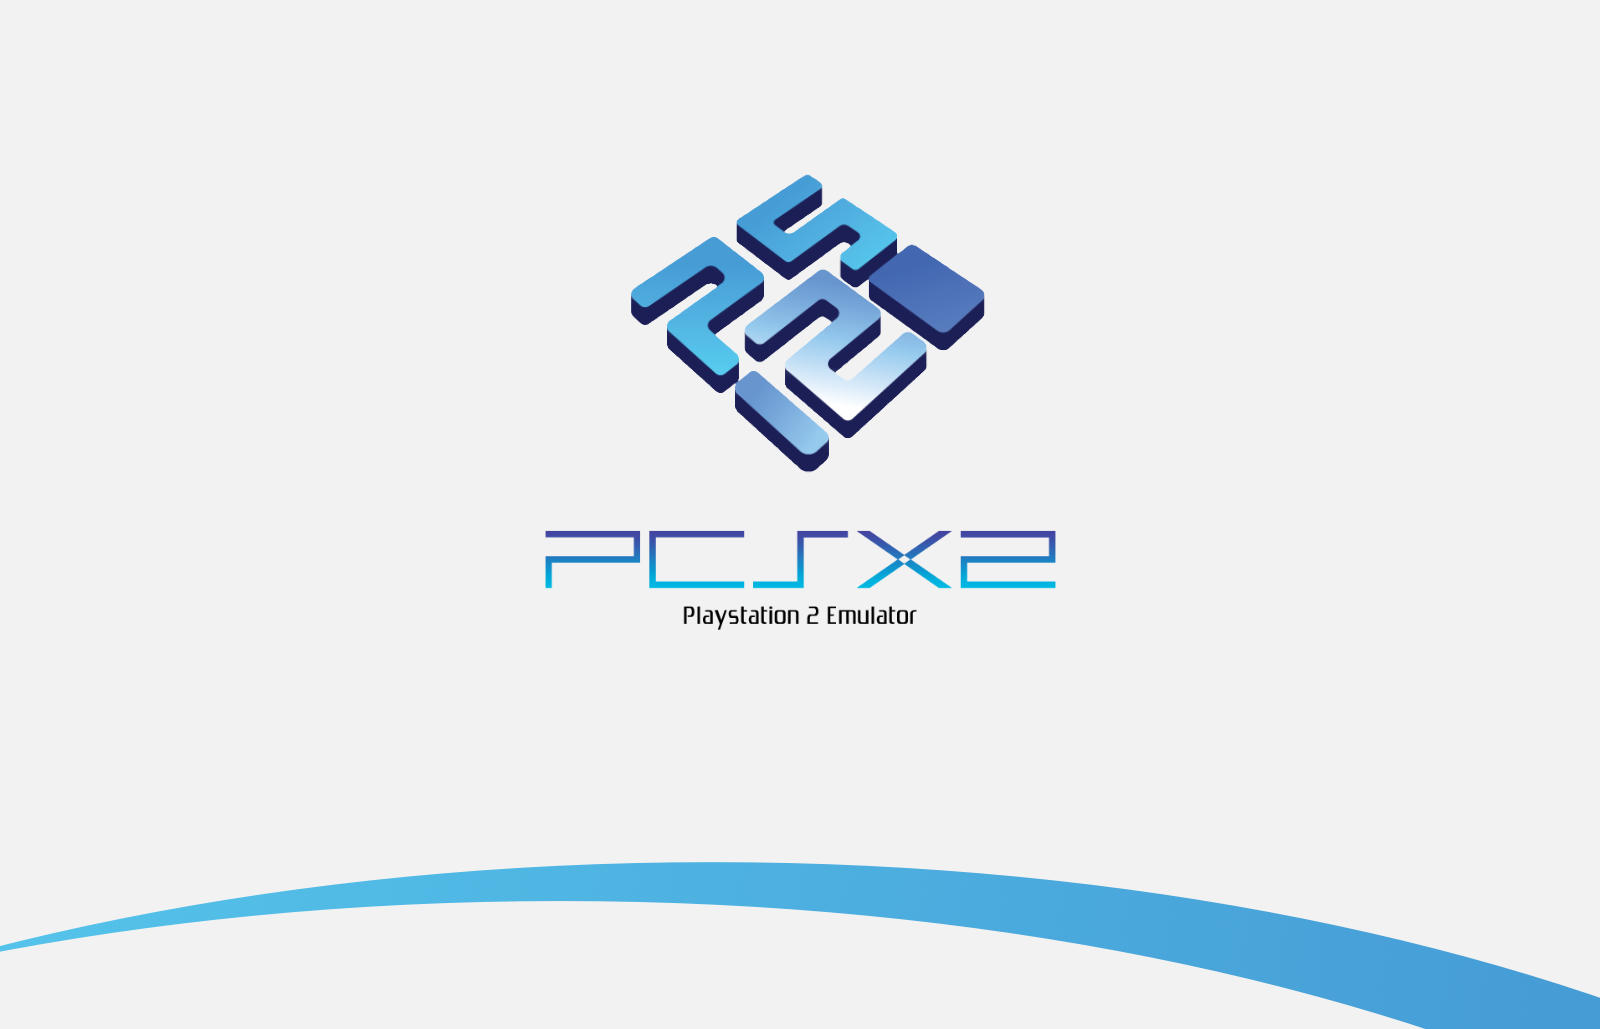 PCSX2 is a PS2 Emulator for PC, Windows